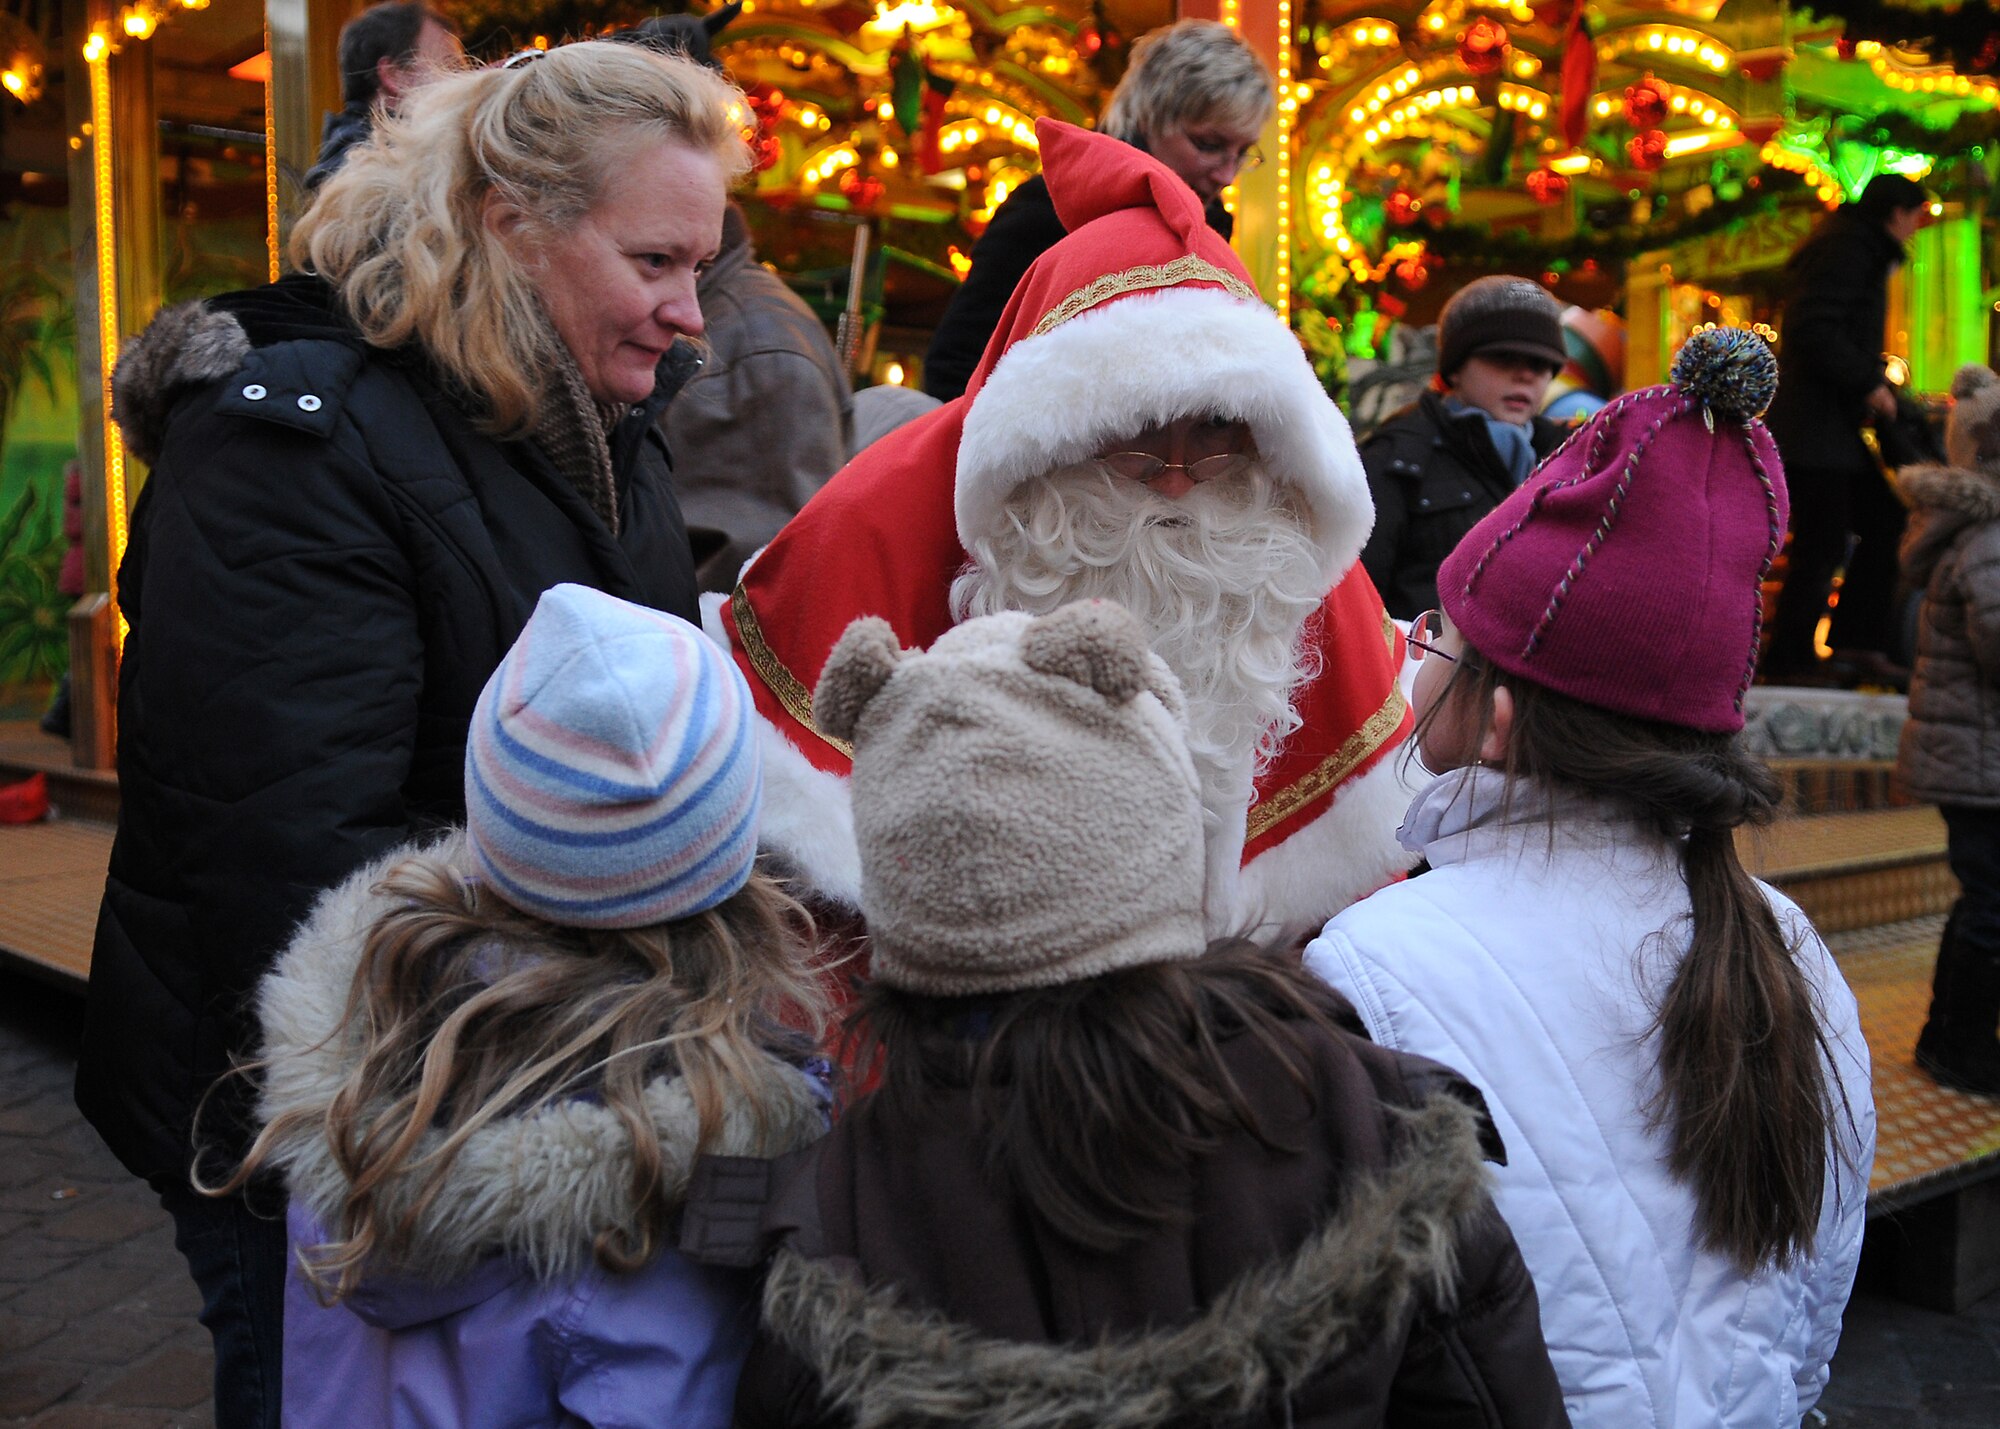 TRIER, Germany -- Santa Claus asks children what they would like for Christmas Dec. 17 at the Trier Christmas Market. The Airman and Family Readiness Center invited the spouses and children of deployed servicemembers to tour the market and enjoy the German culture. (U.S. Air Force photo/Airman 1st Class Nathanael Callon)